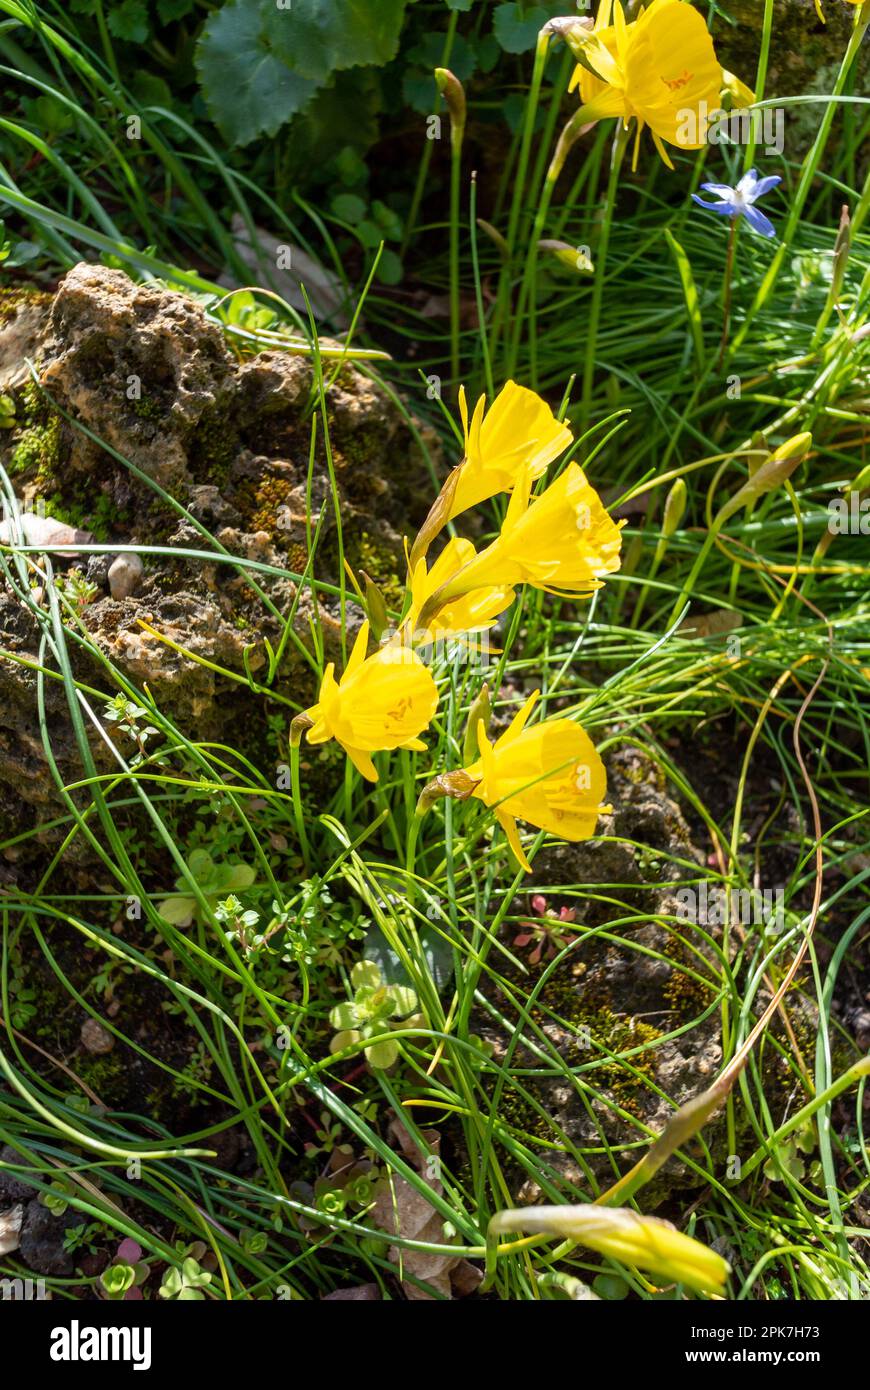 Narcissus bulbocodium, the petticoat daffodil or hoop-petticoat daffodil that is a species of flowering plant in the family Amaryllidaceae Stock Photo